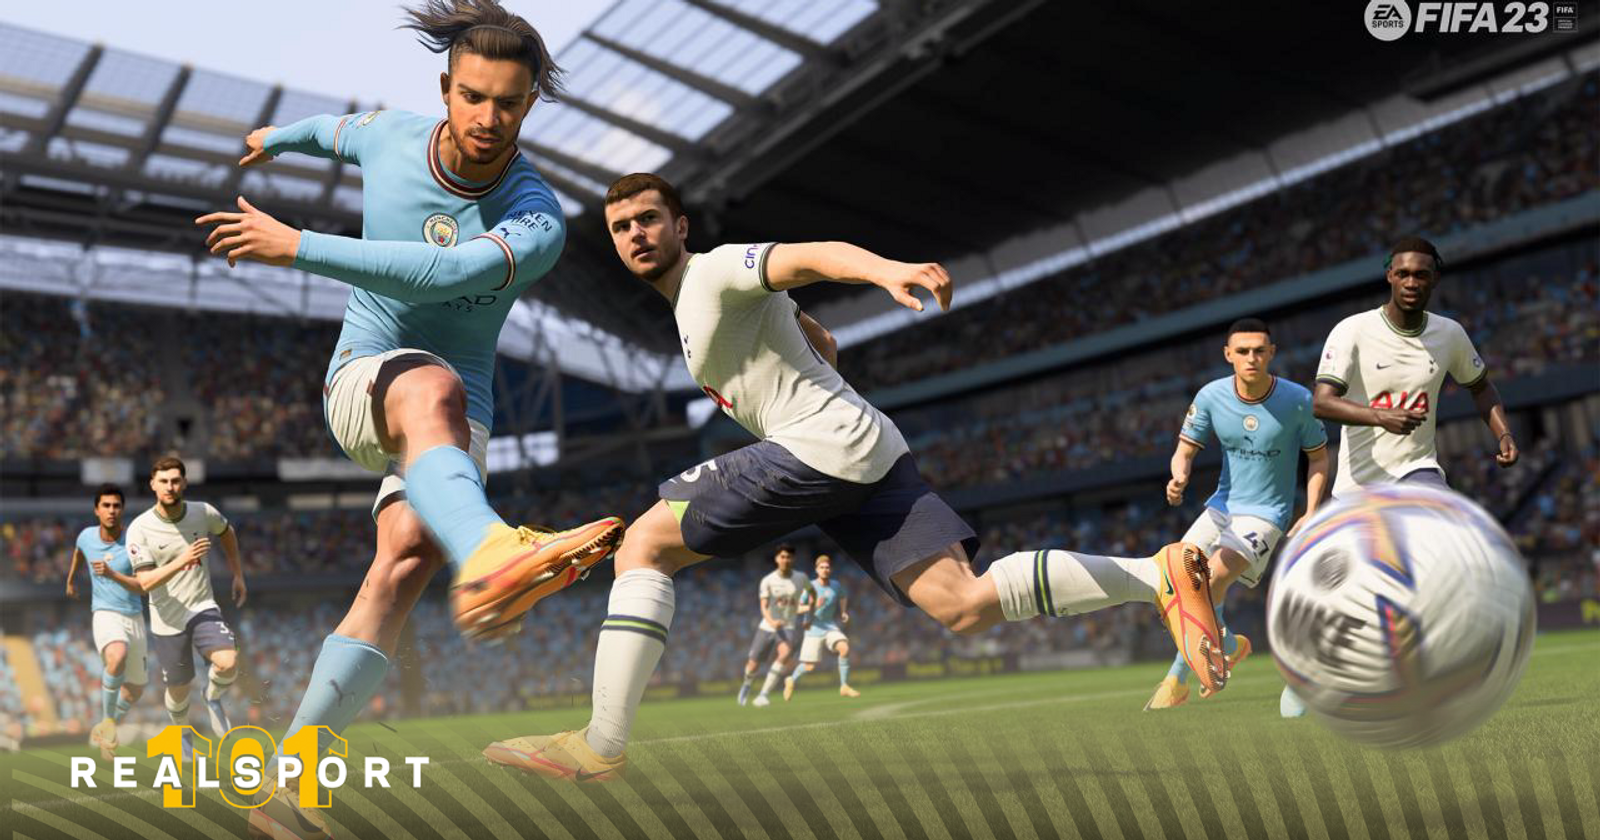 How To Buy FIFA Points On FIFA 23 Web App - TechStory